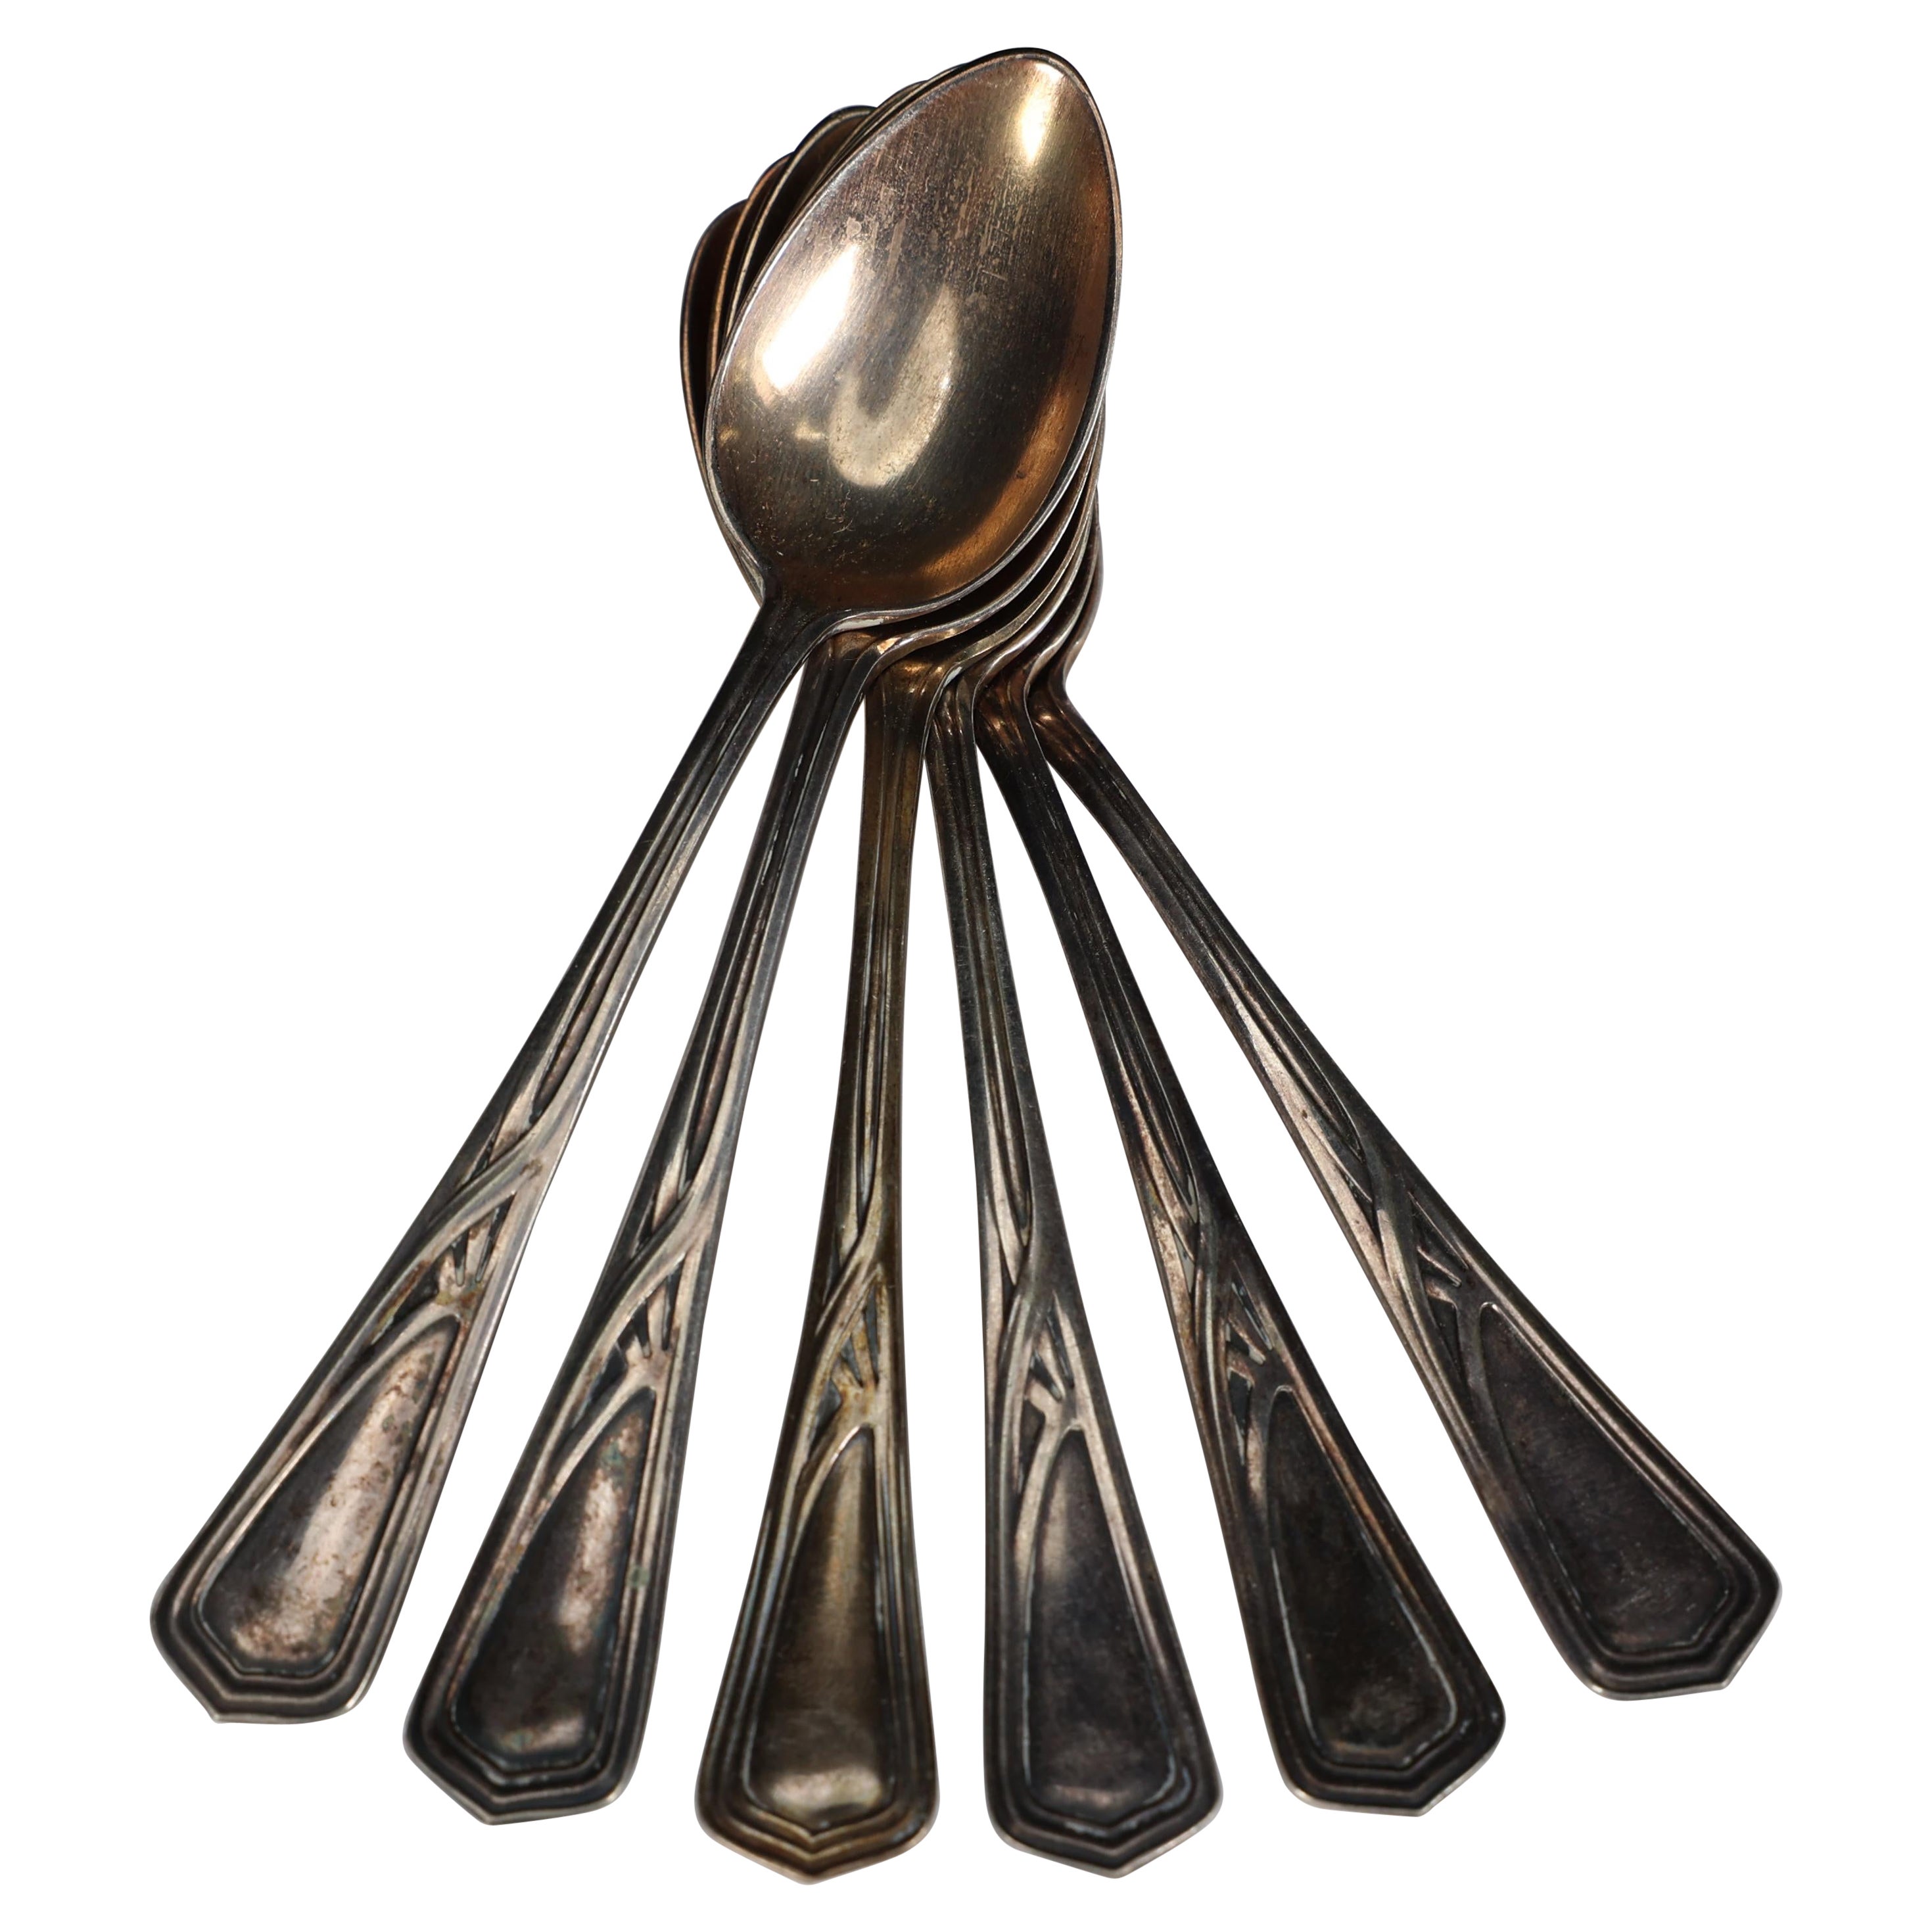 WMF. A set of six Art Nouveau silver plated desert spoons in unused condition.